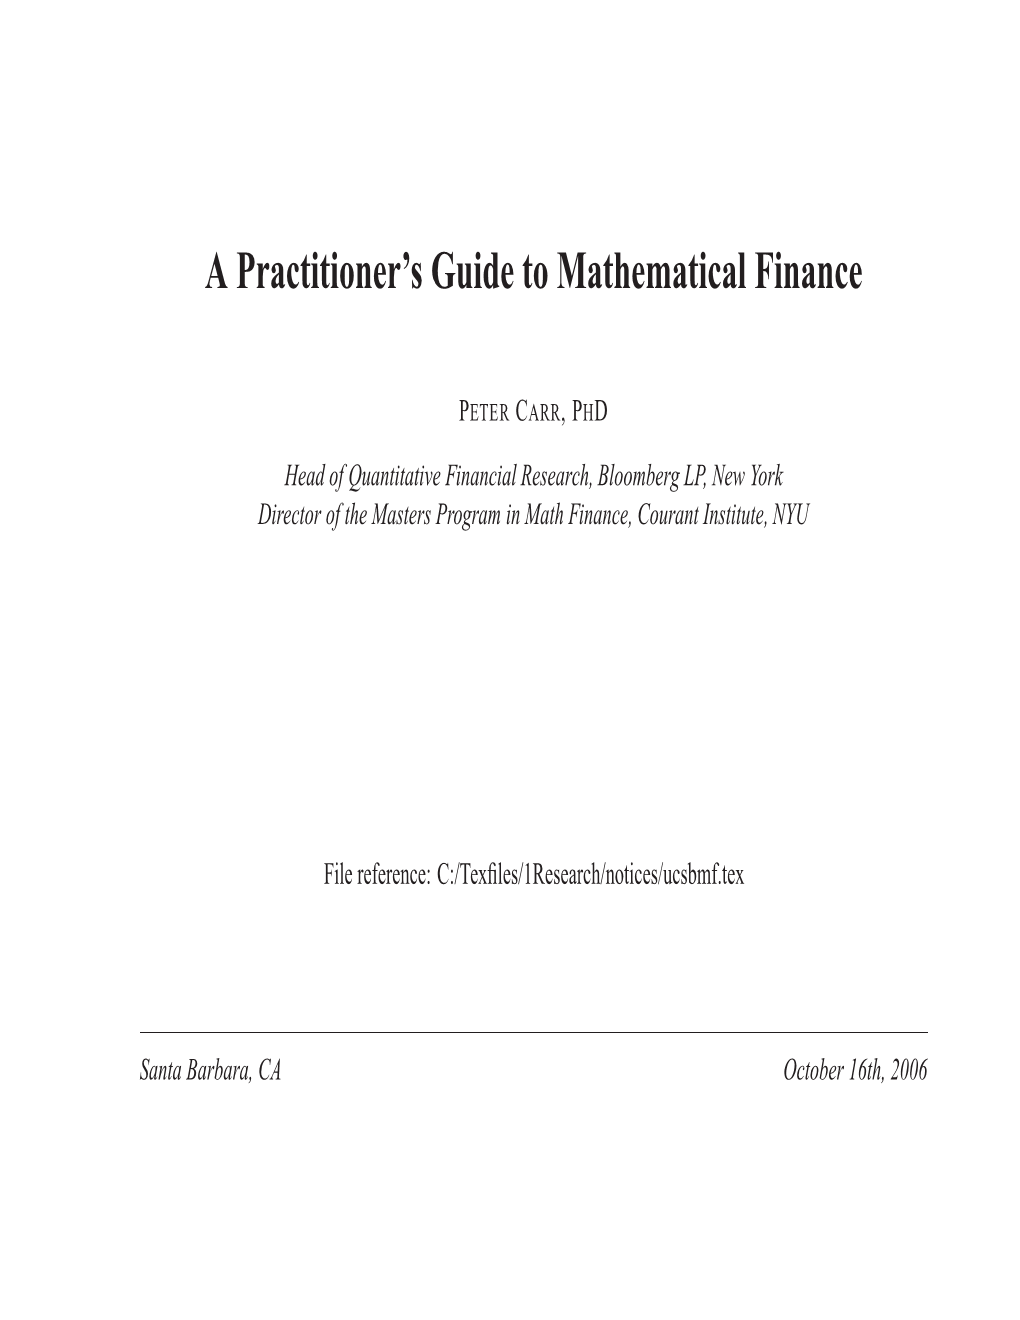 A Practitioner's Guide to Mathematical Finance